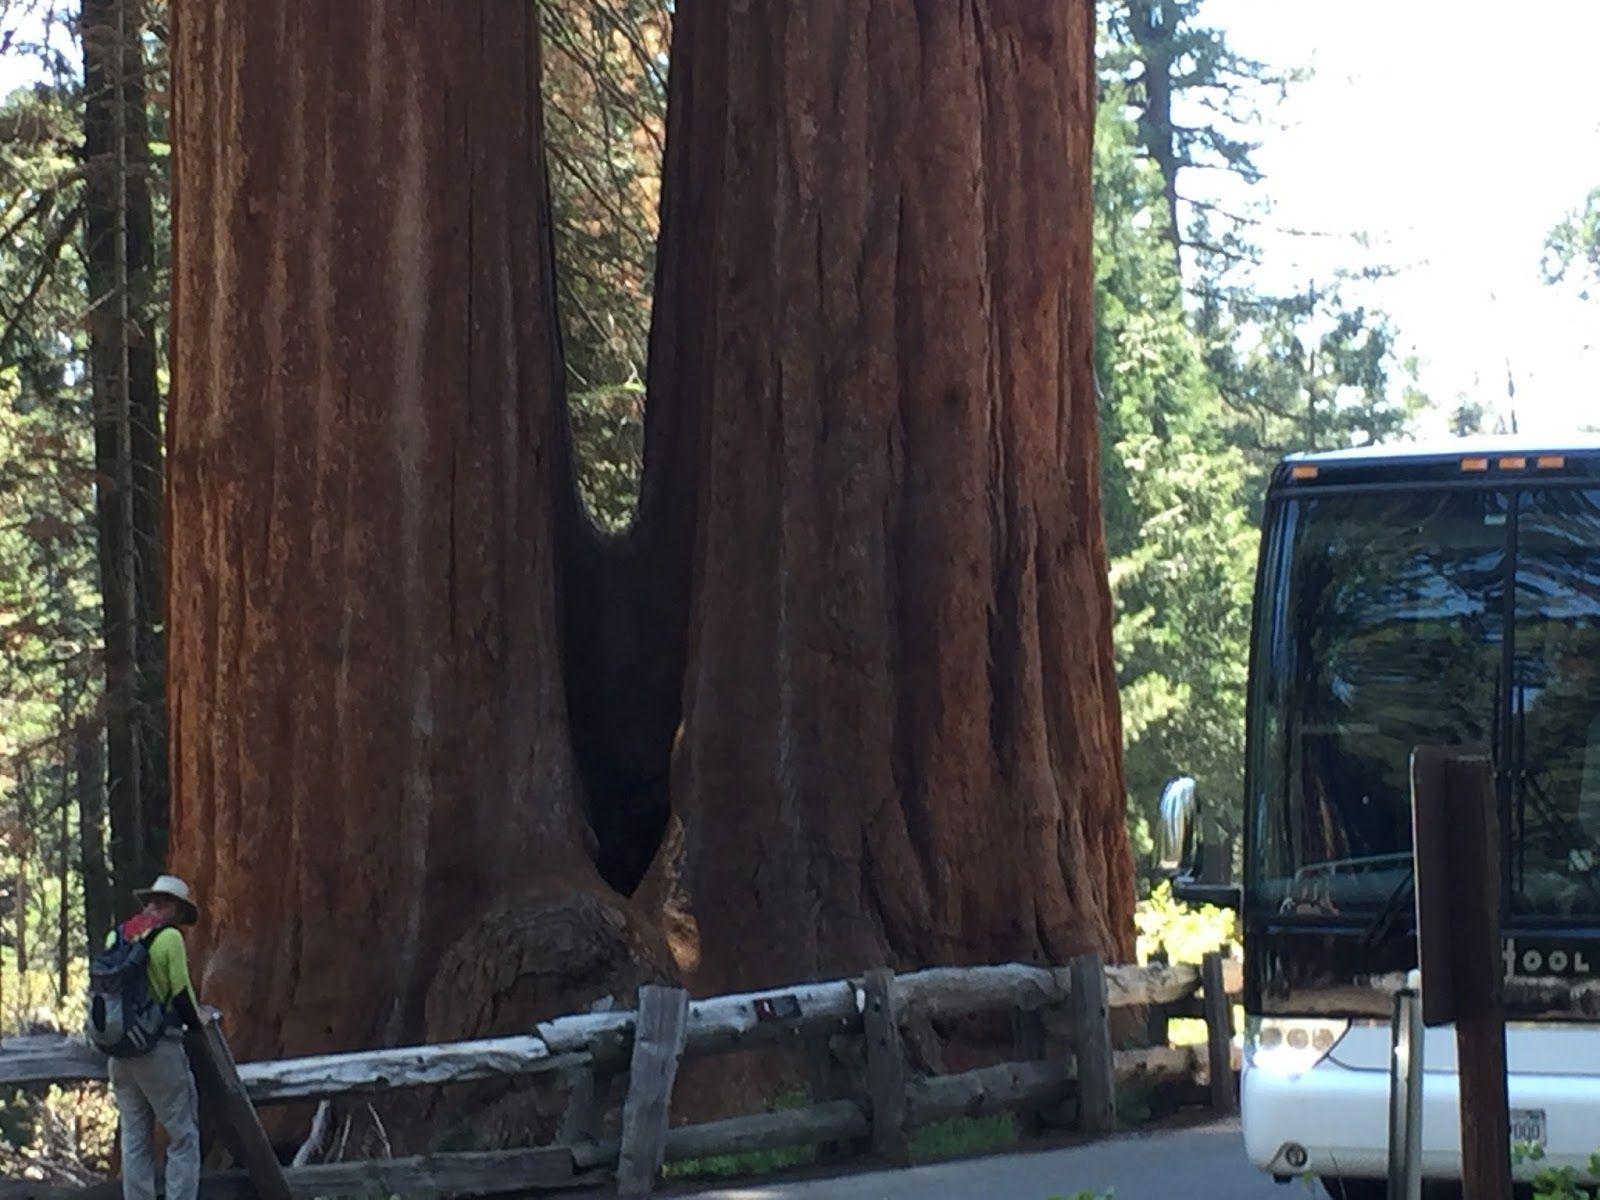 The Roadrunner Chronicles: A Day in Sequoia and King's Canyon